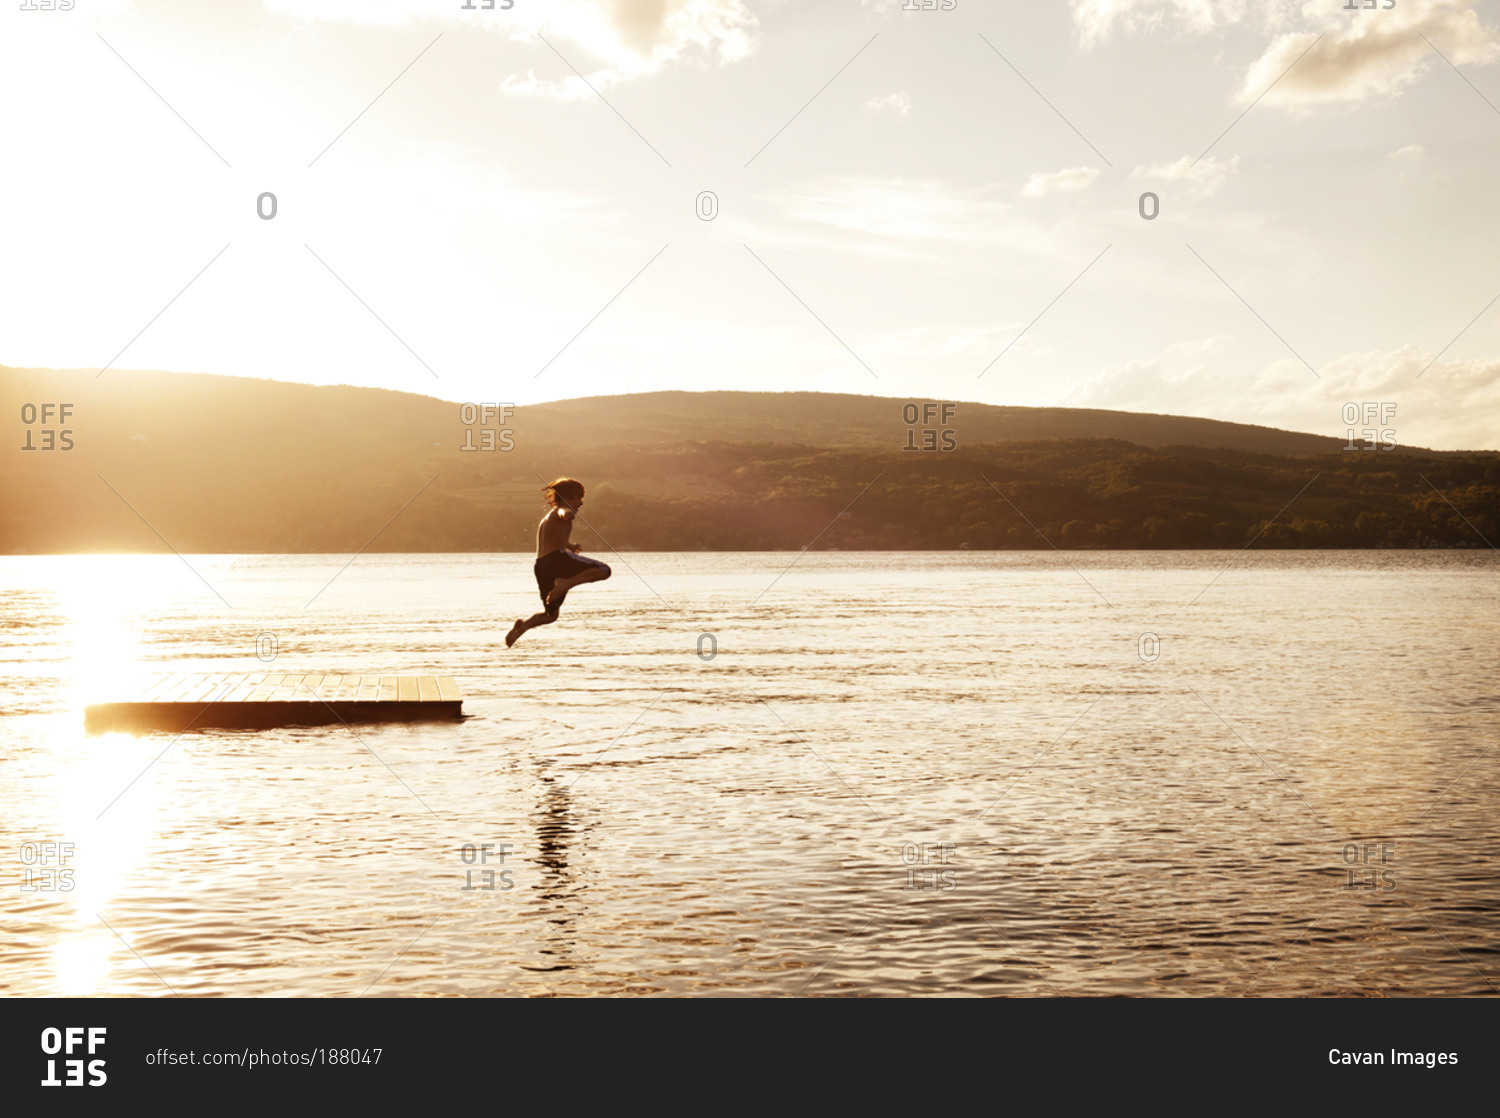 A boy jumps off a floating dock on a lake